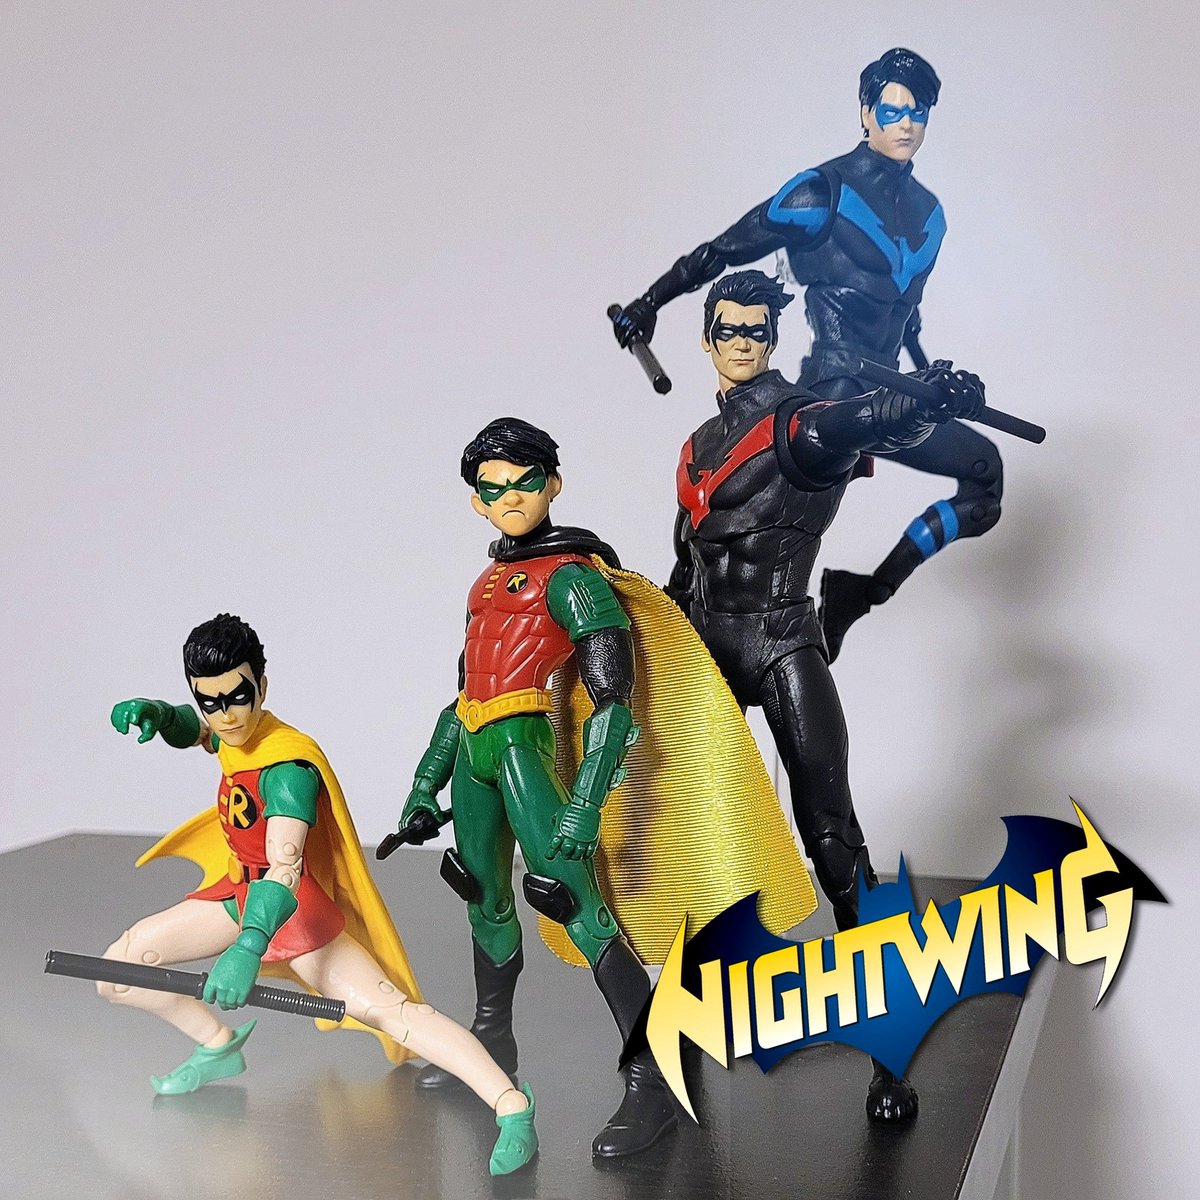 Past and present 😁
#Robin #Nightwing #McfarlaneToys 
#DCMultiverse #DCdirect